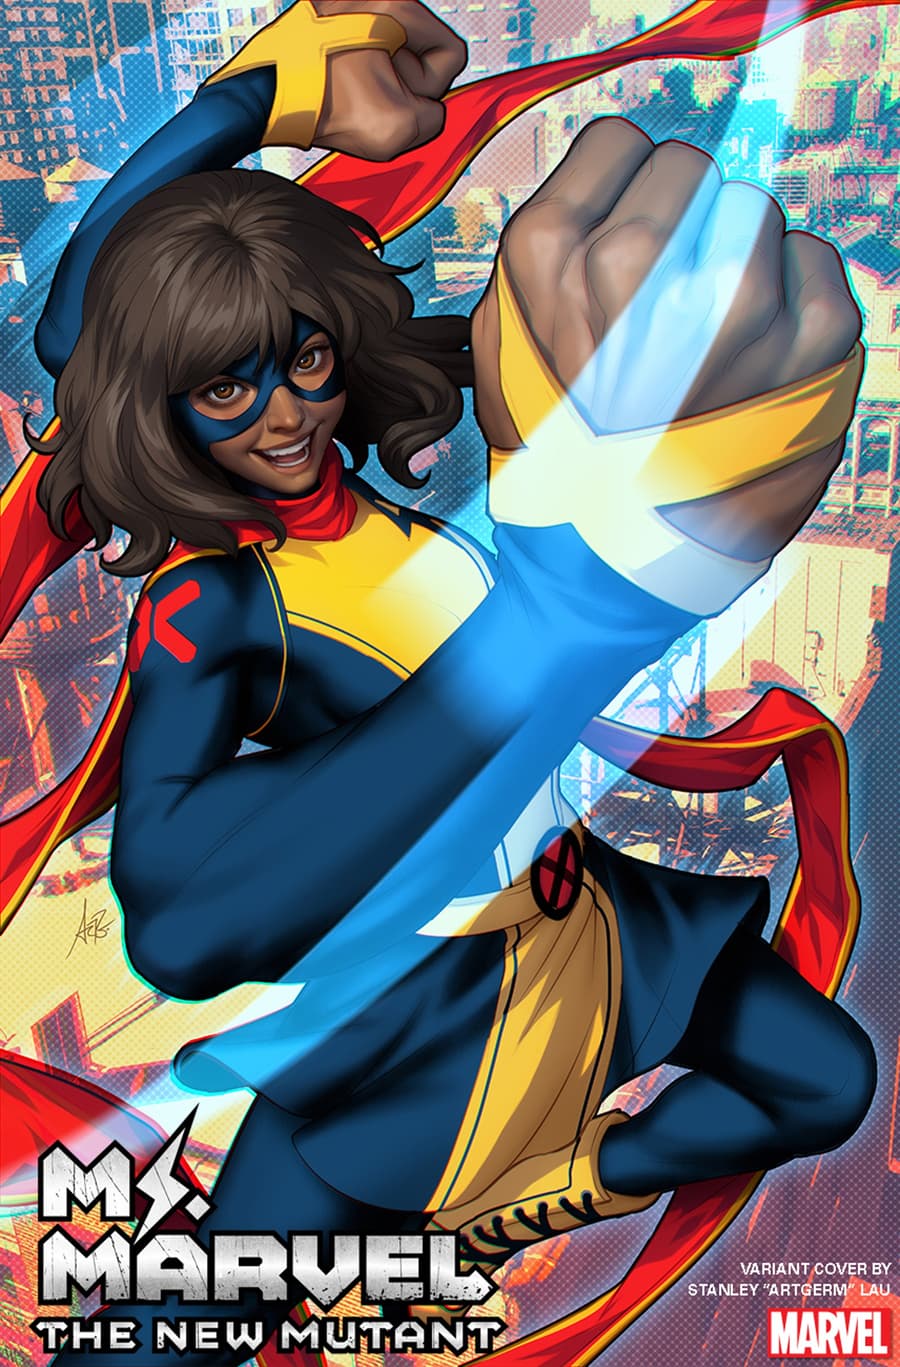 MS. MARVEL: THE NEW MUTANT #1 variant cover art by Stanley "Artgerm" Lau